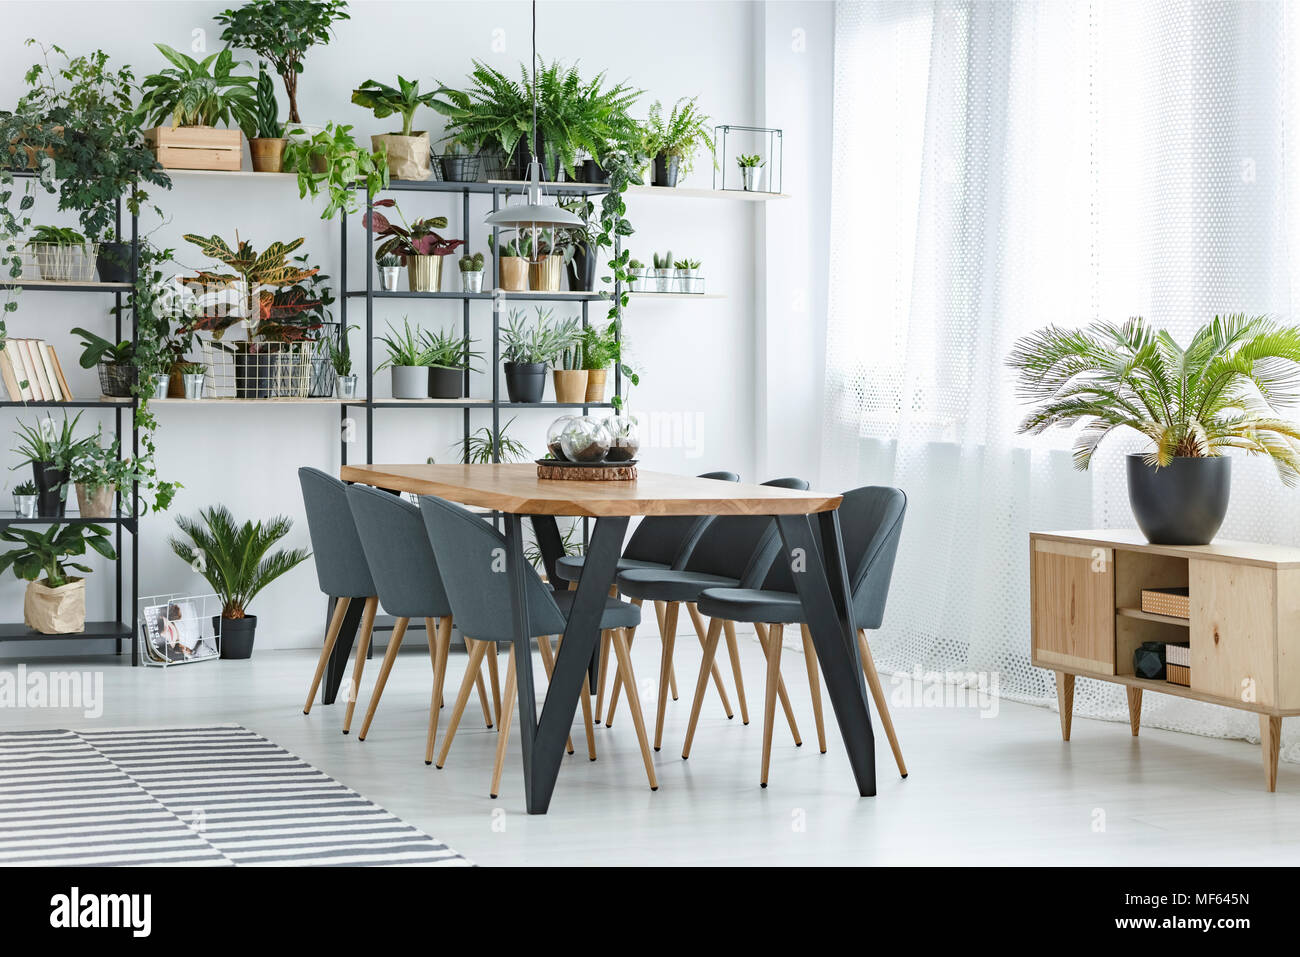 Fern on wooden cupboard near window in floral dining room interior with grey chairs at table Stock Photo